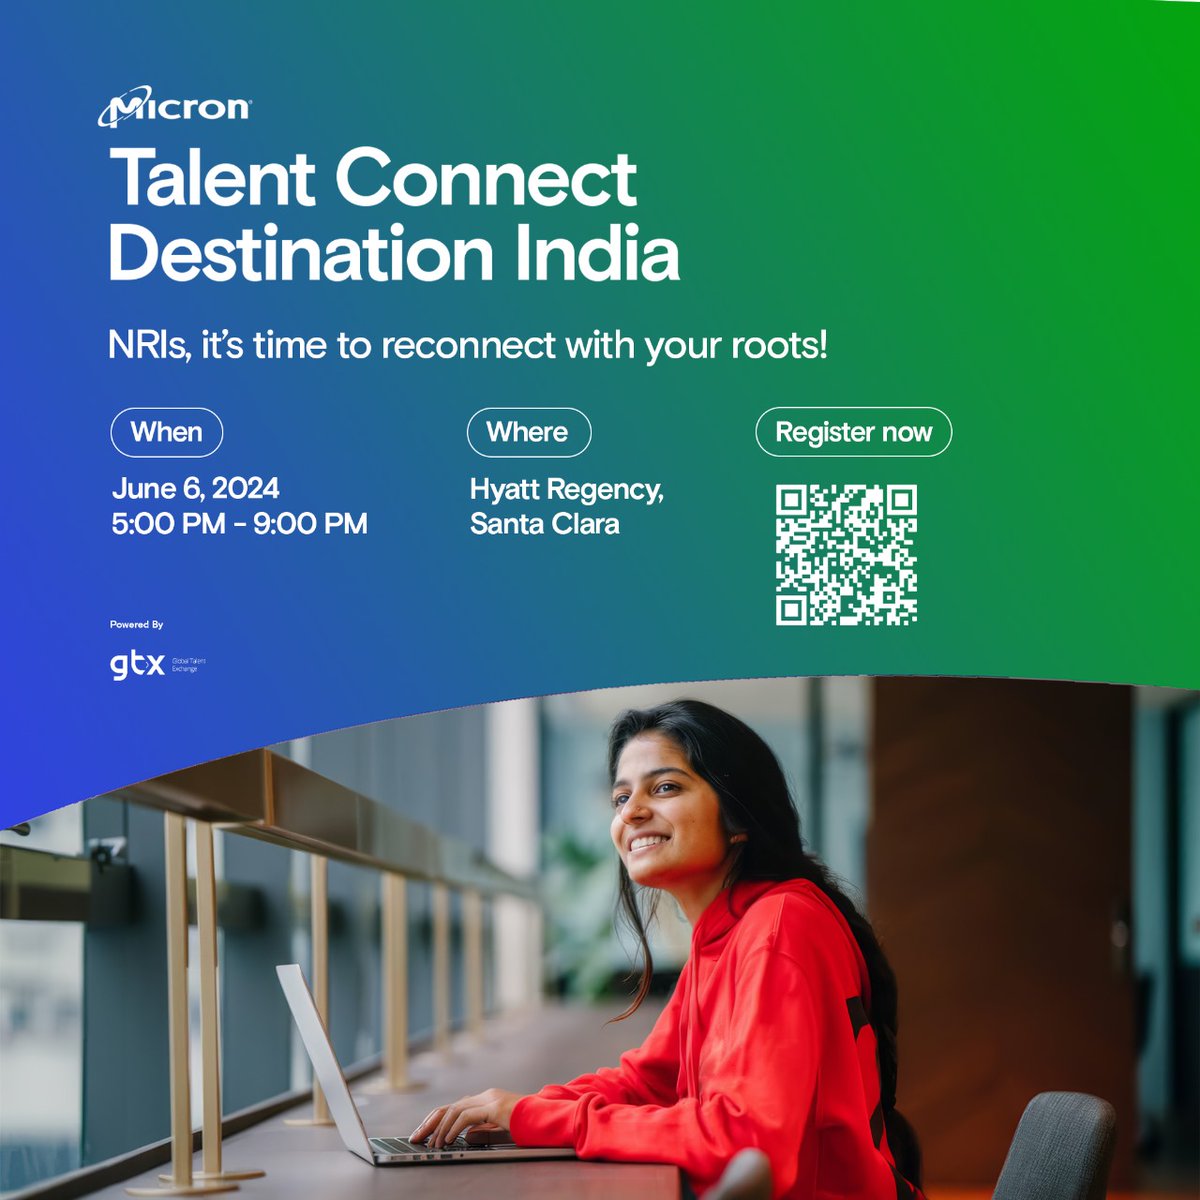 Feeling a familiar tug calling you back home? 🇮🇳 #NRIs, it's time to grab the opportunity! Join us at the ‘Micron Talent Connect - Destination India’ & dive into what’s changed and what’s happening back home @MicronTech 🔗 Register now! microntalentconnect.globaltalex.com